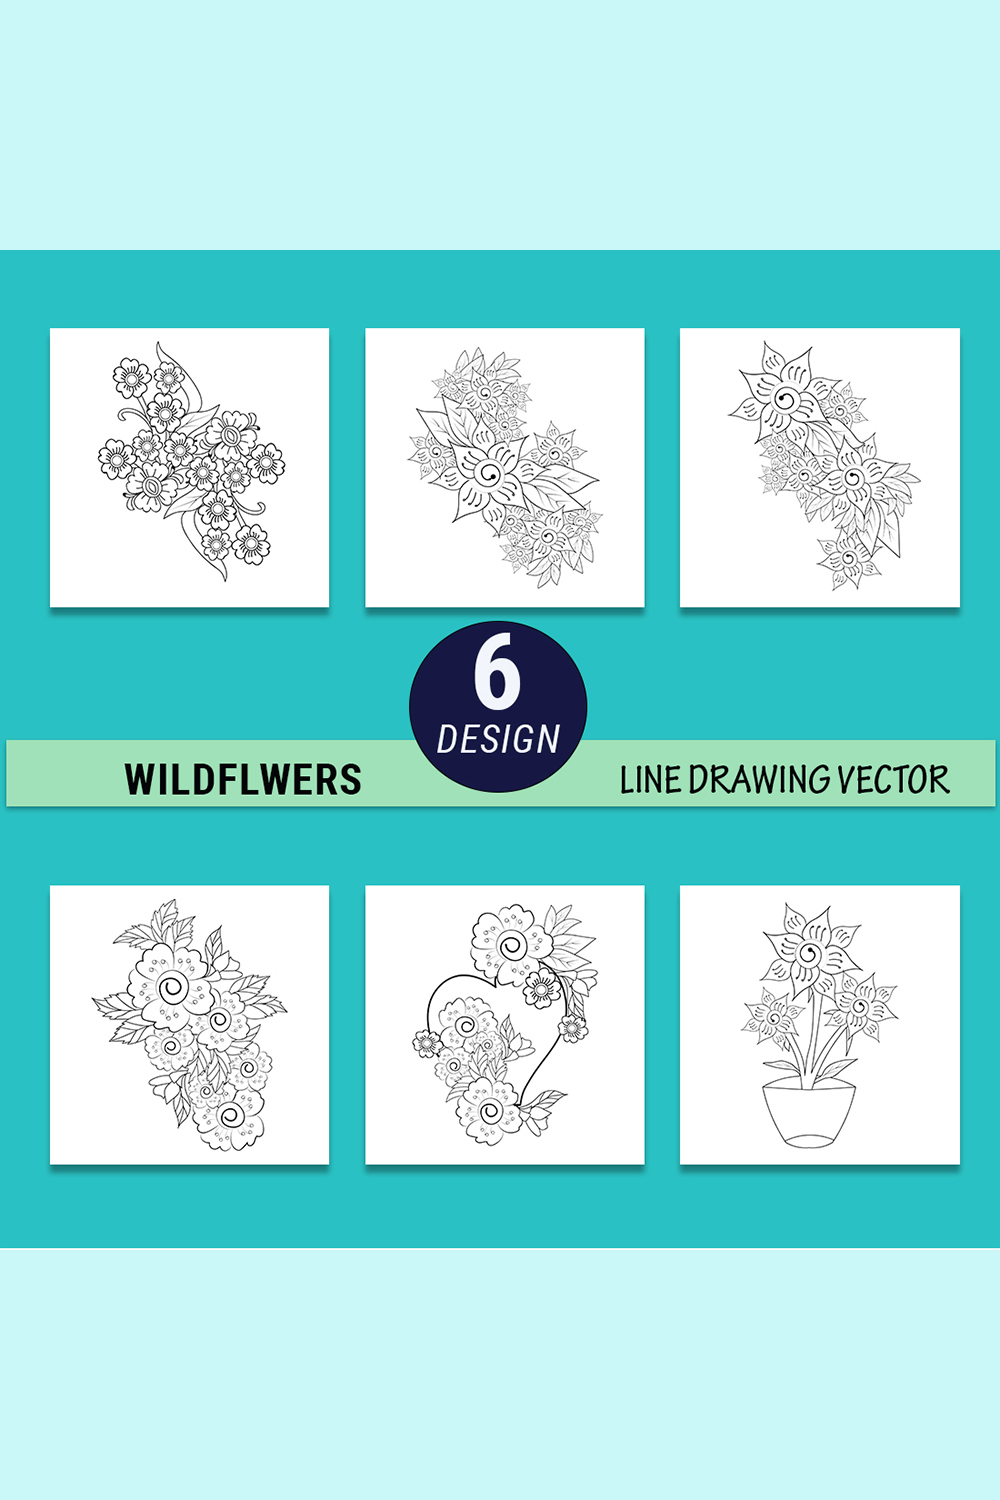 wildflower drawing, outline wildflower drawing, wildflower drawing tattoo, botanical wildflower drawing pinterest preview image.